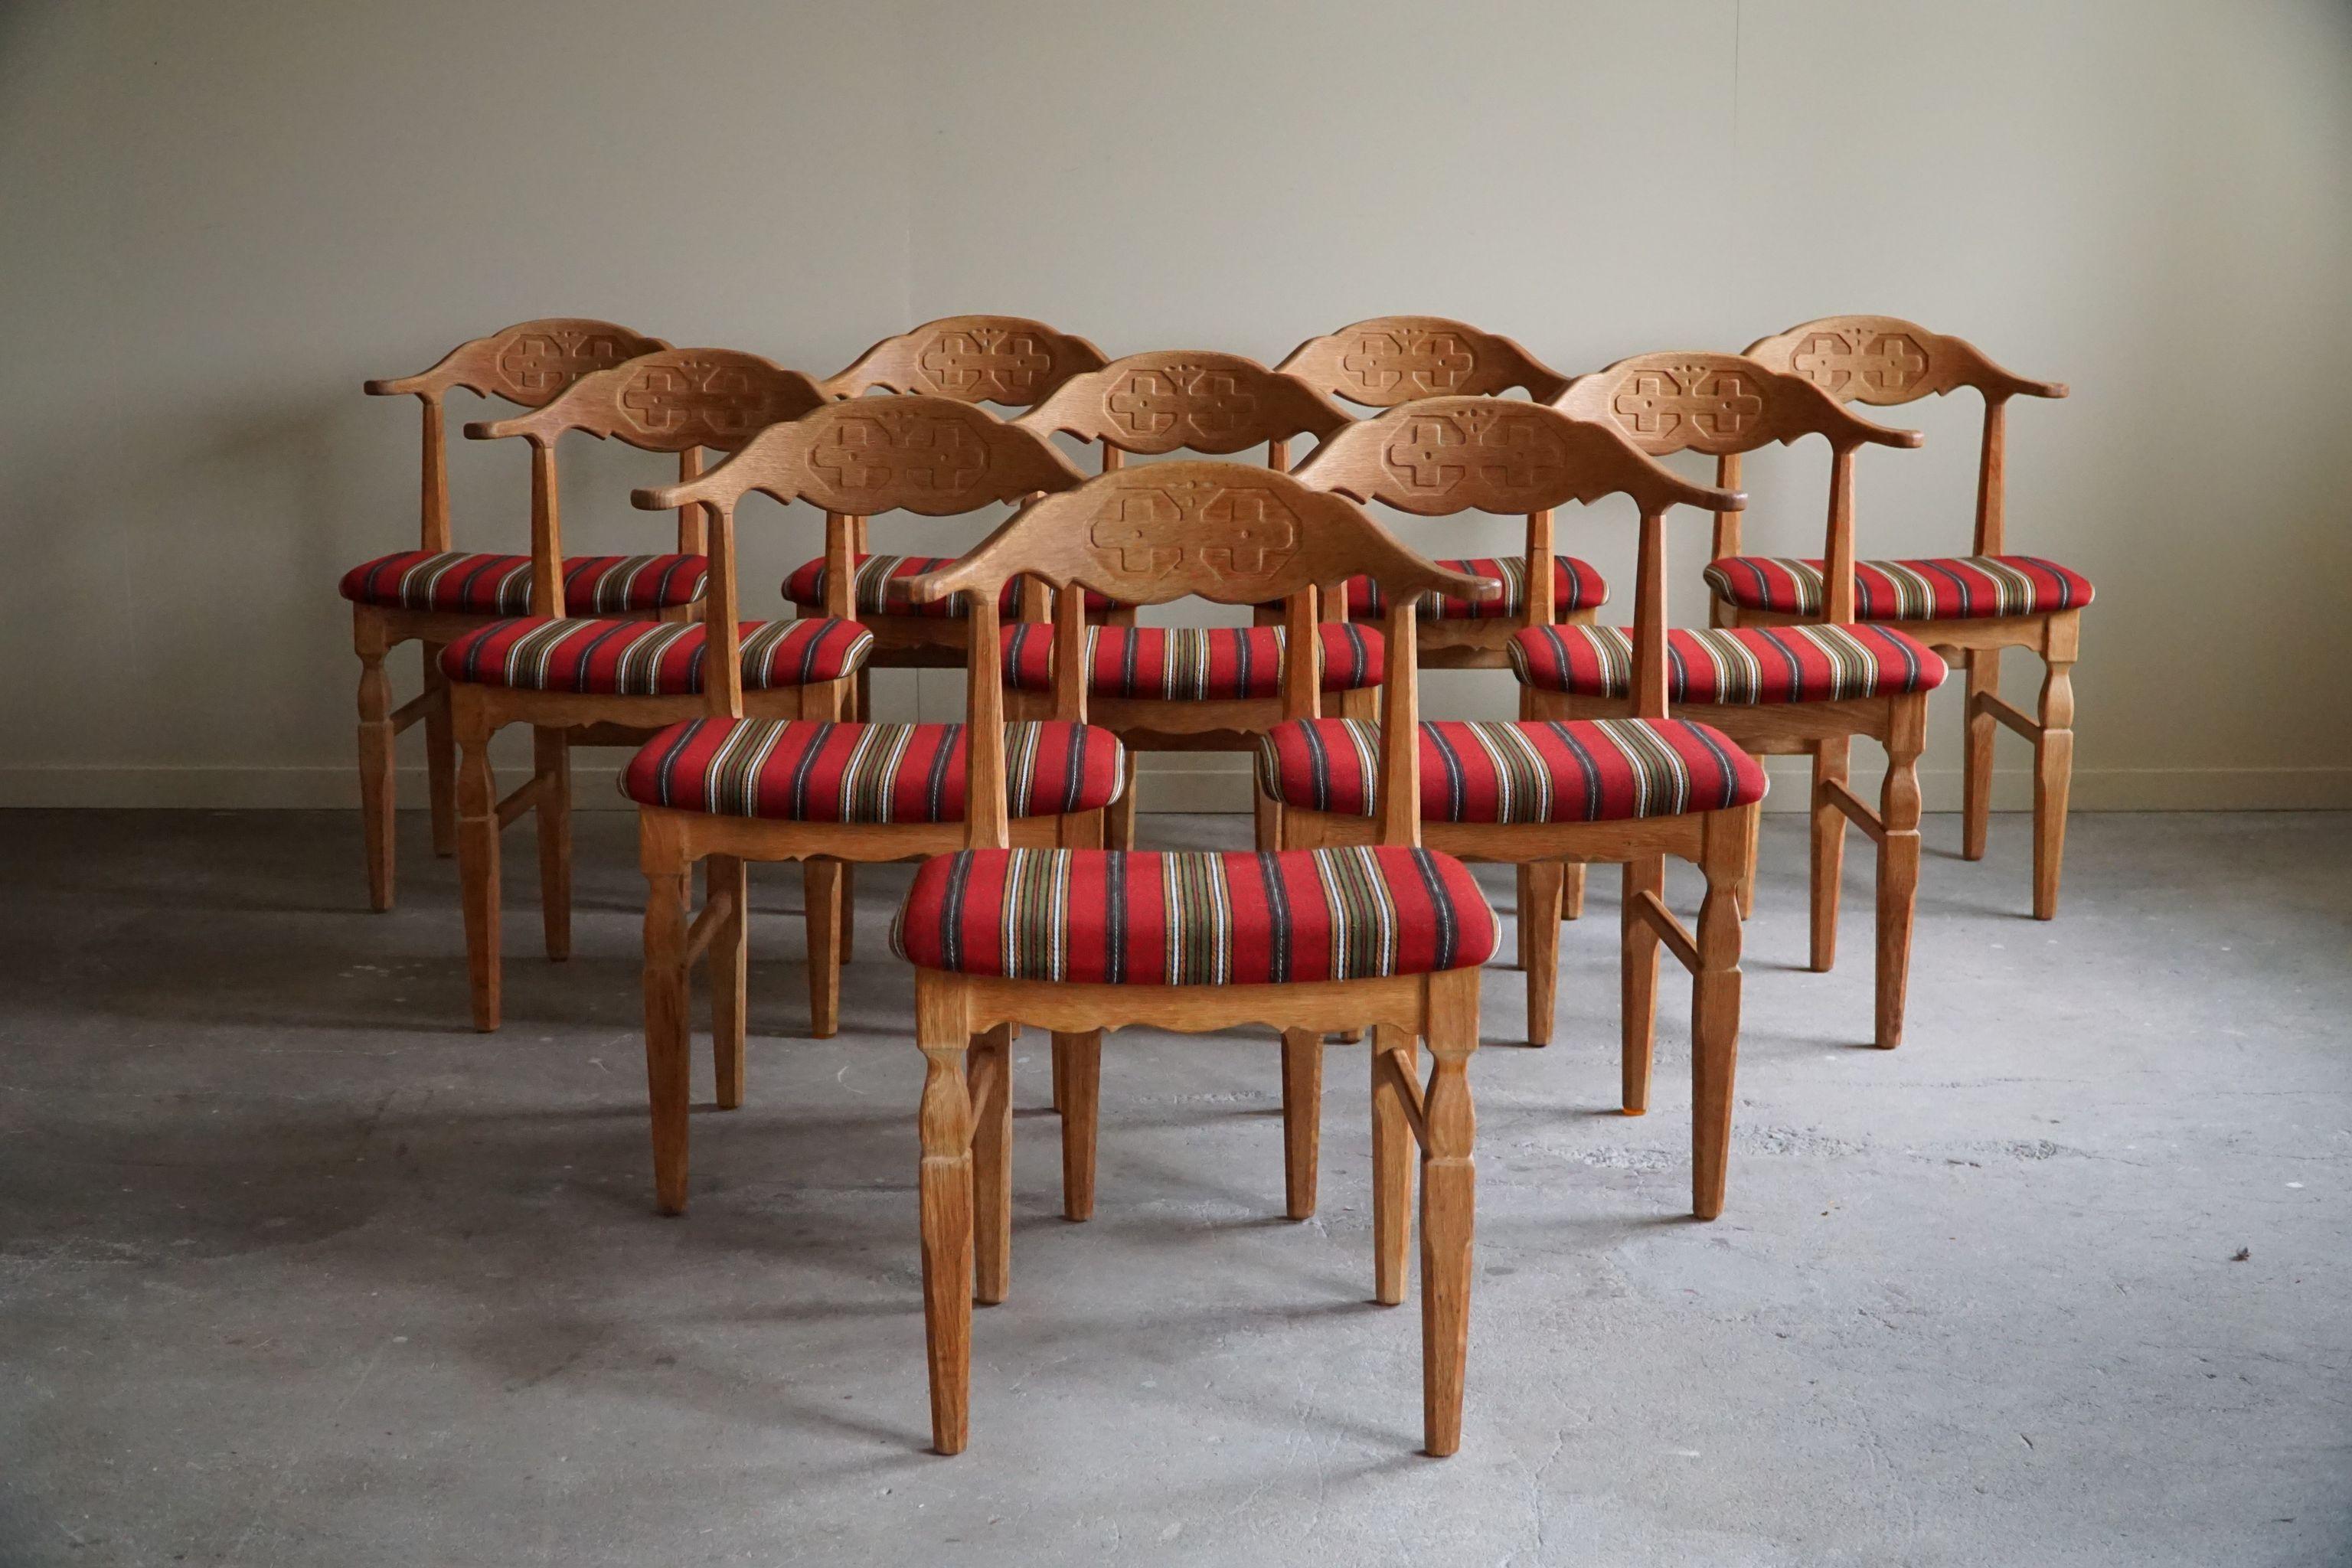 A sculptural classic set of 10 dining chairs in solid patinated oak with seats in its original wool fabric. Made by Henning (Henry) Kjærnulf for E.G. Møbler - circa 1960s.

These modern chairs have a really strong impression that pairs well with